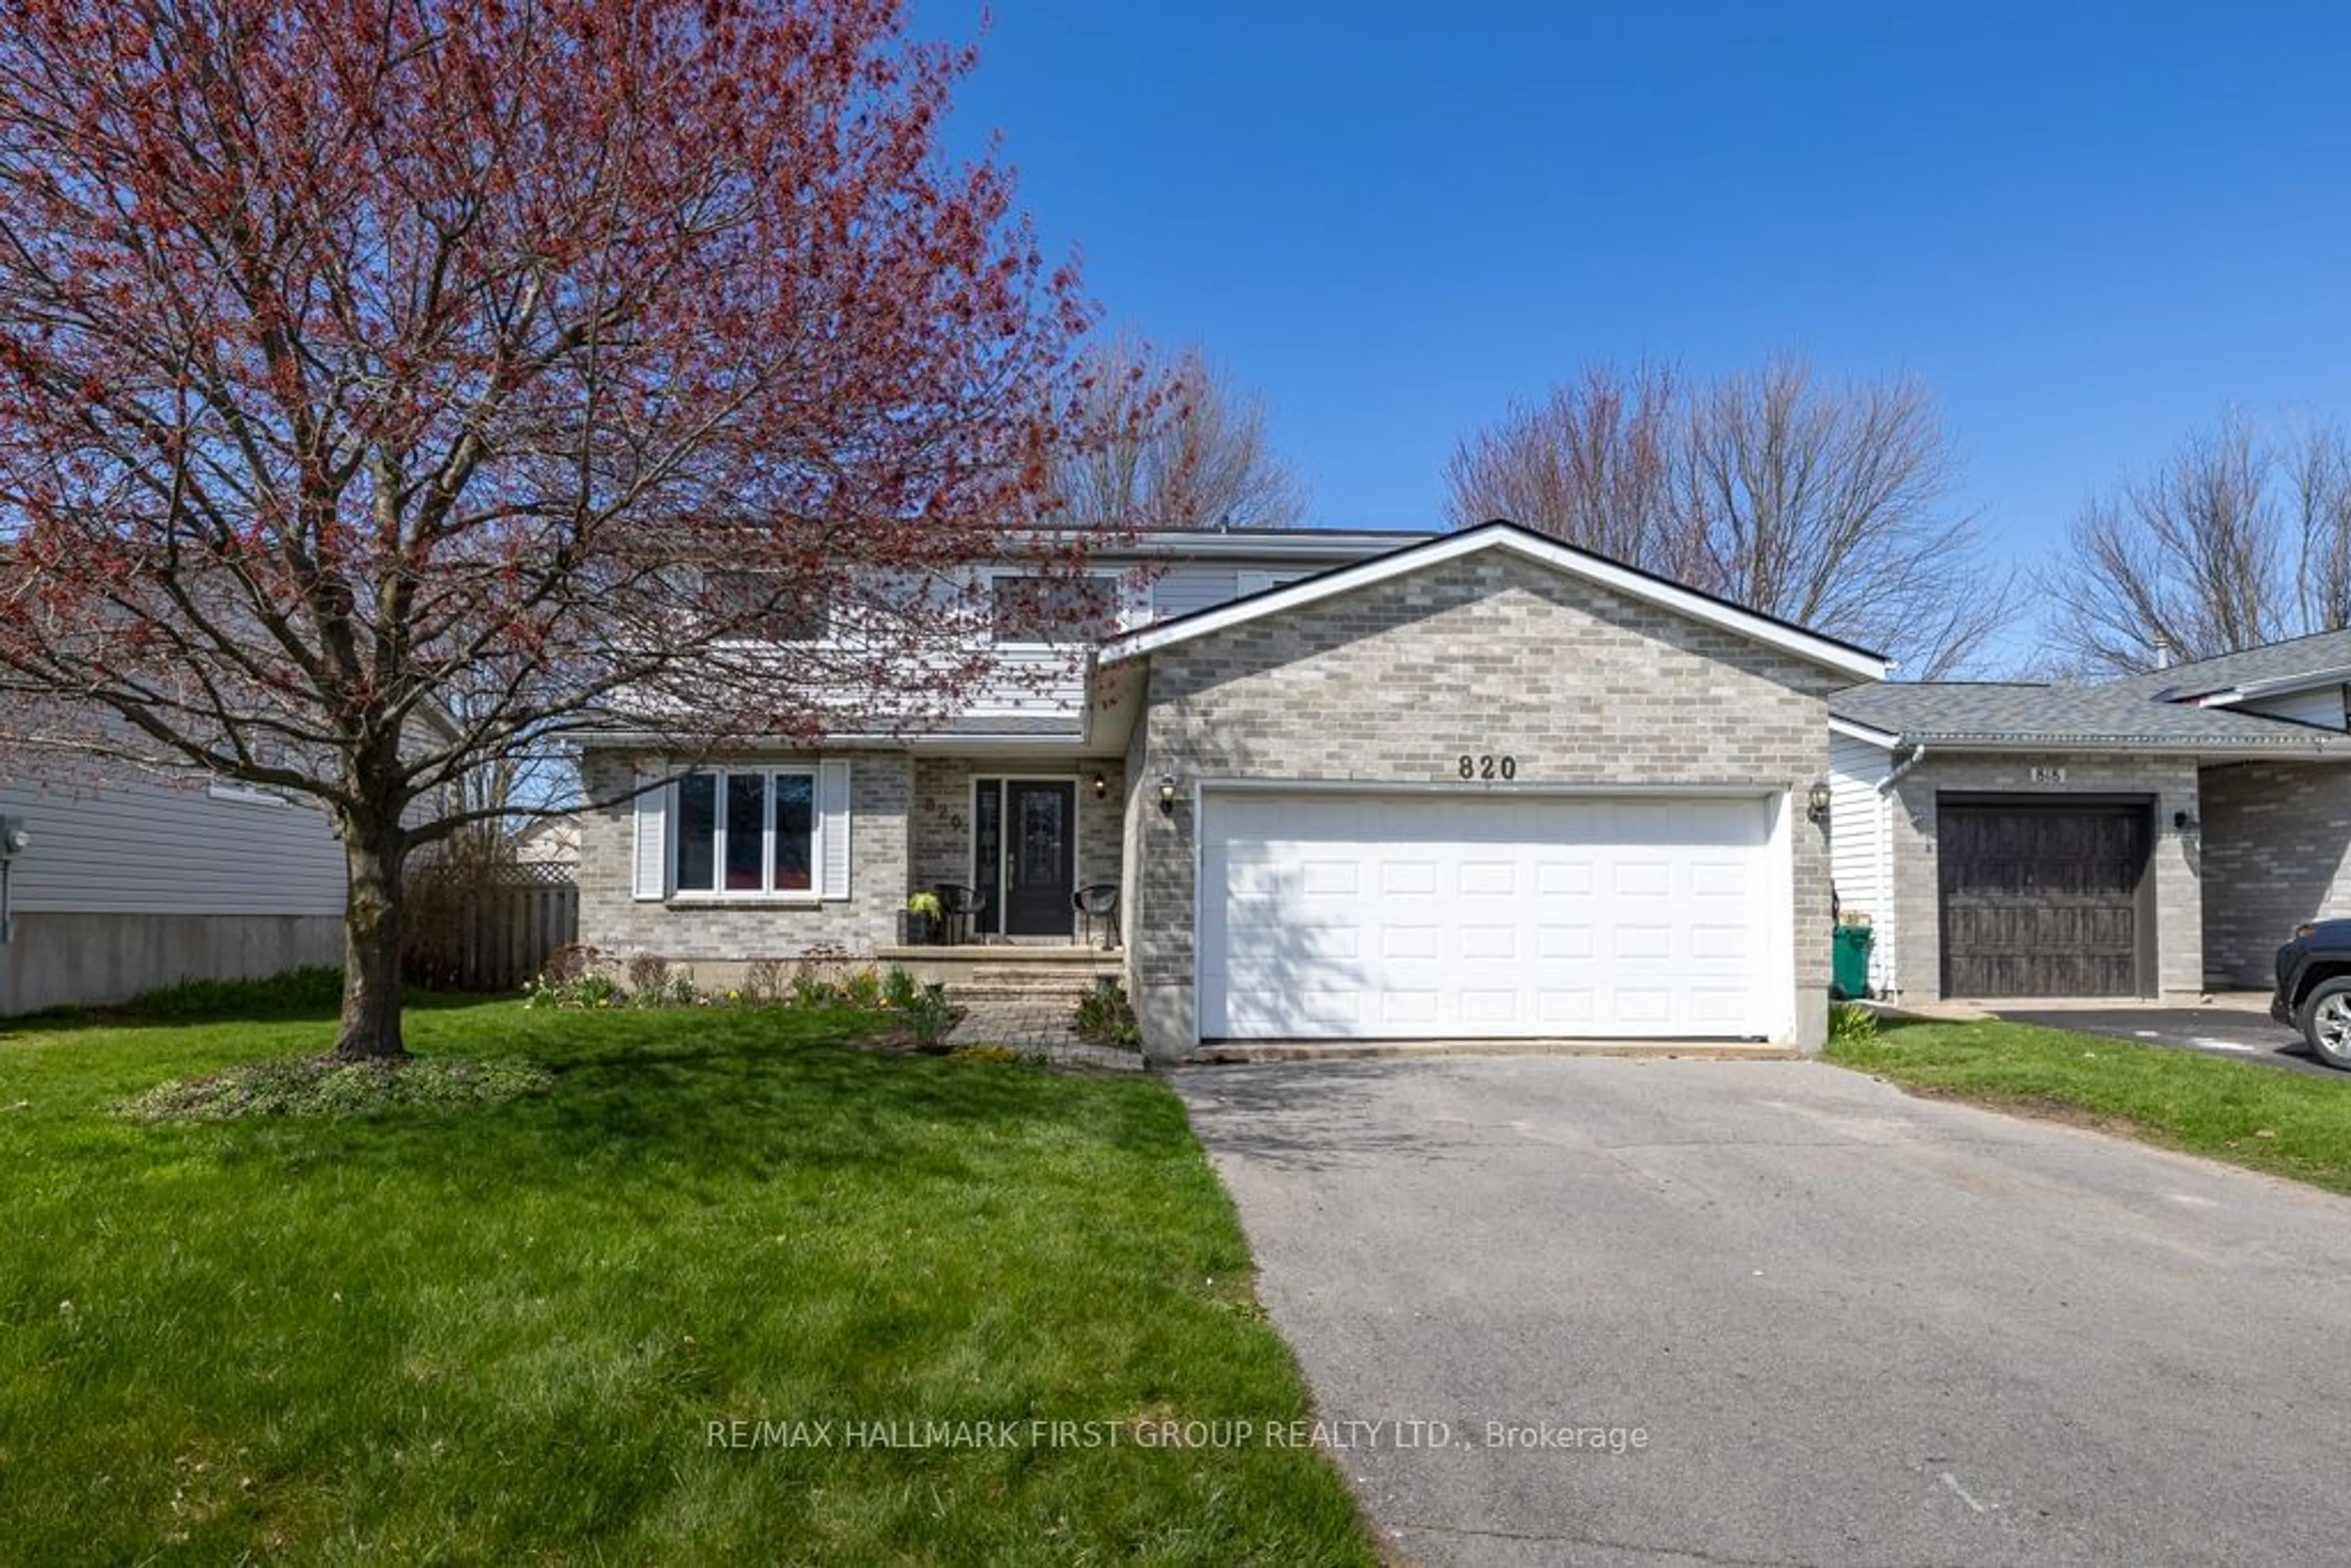 Frontside or backside of a home for 820 Cataraqui Woods Dr, Kingston Ontario K7P 2P9